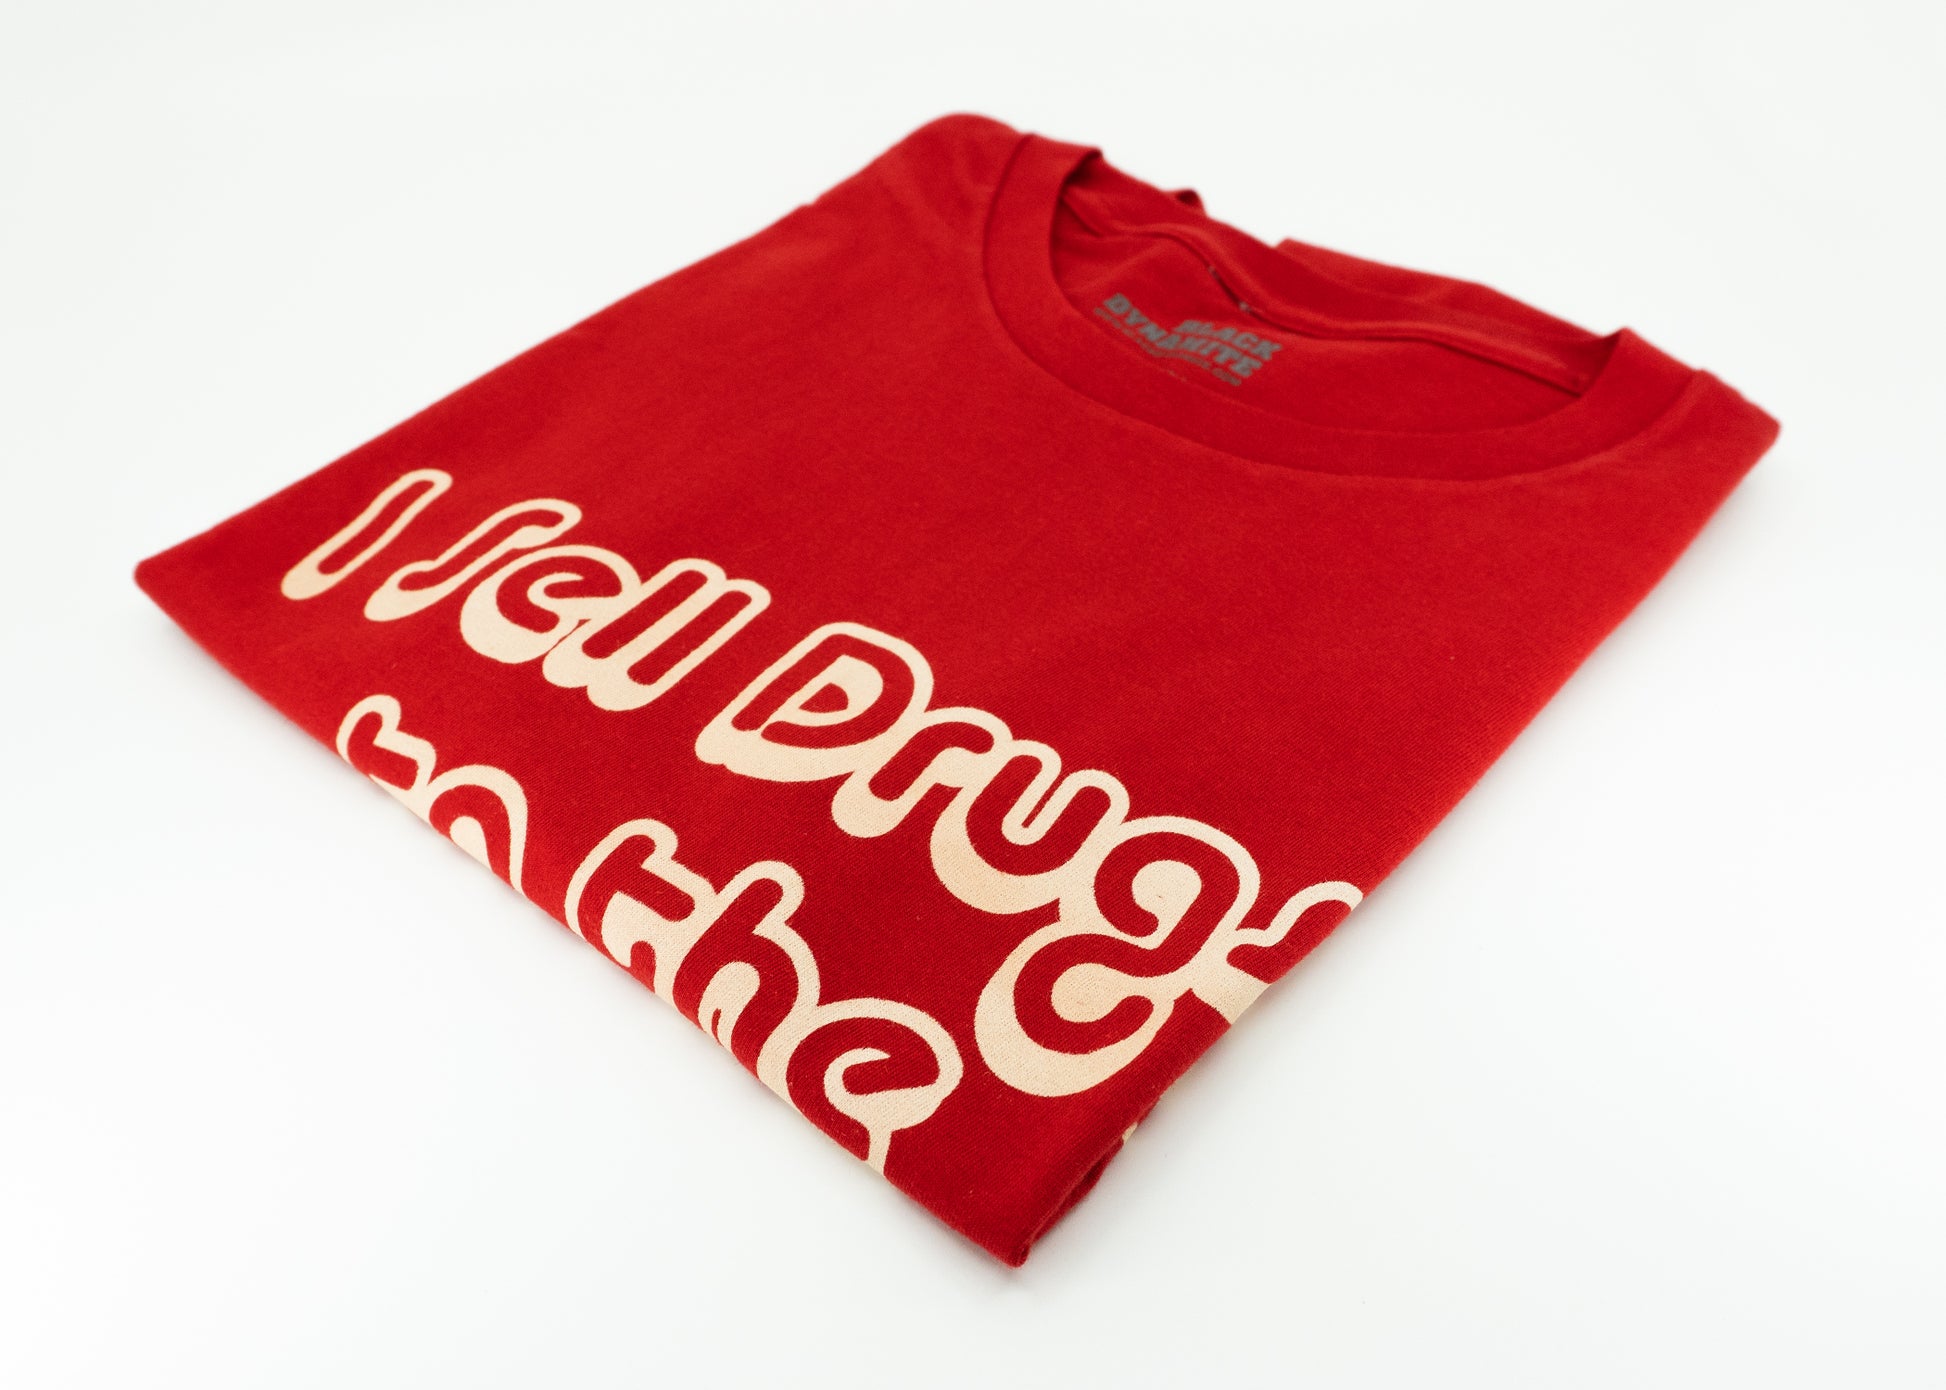 BLACK DYNAMITE! Womens "I Sell Drugs to the Community" Tee by Titmouse Detail View